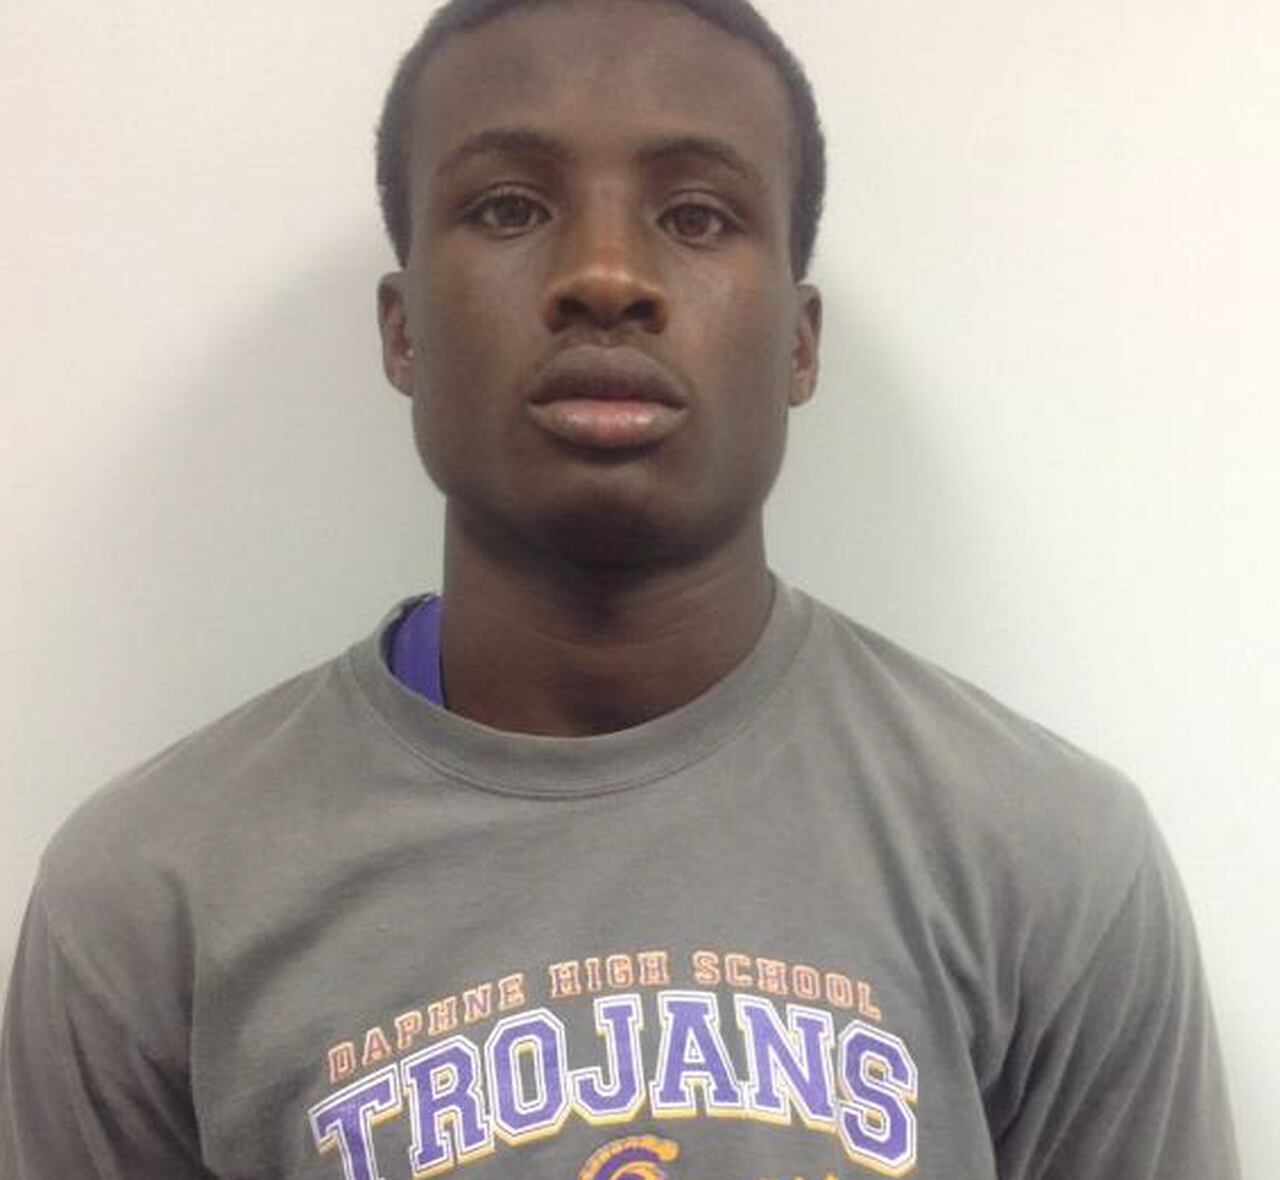 Daphne High Football Starter Accused Of Electronically Soliciting A